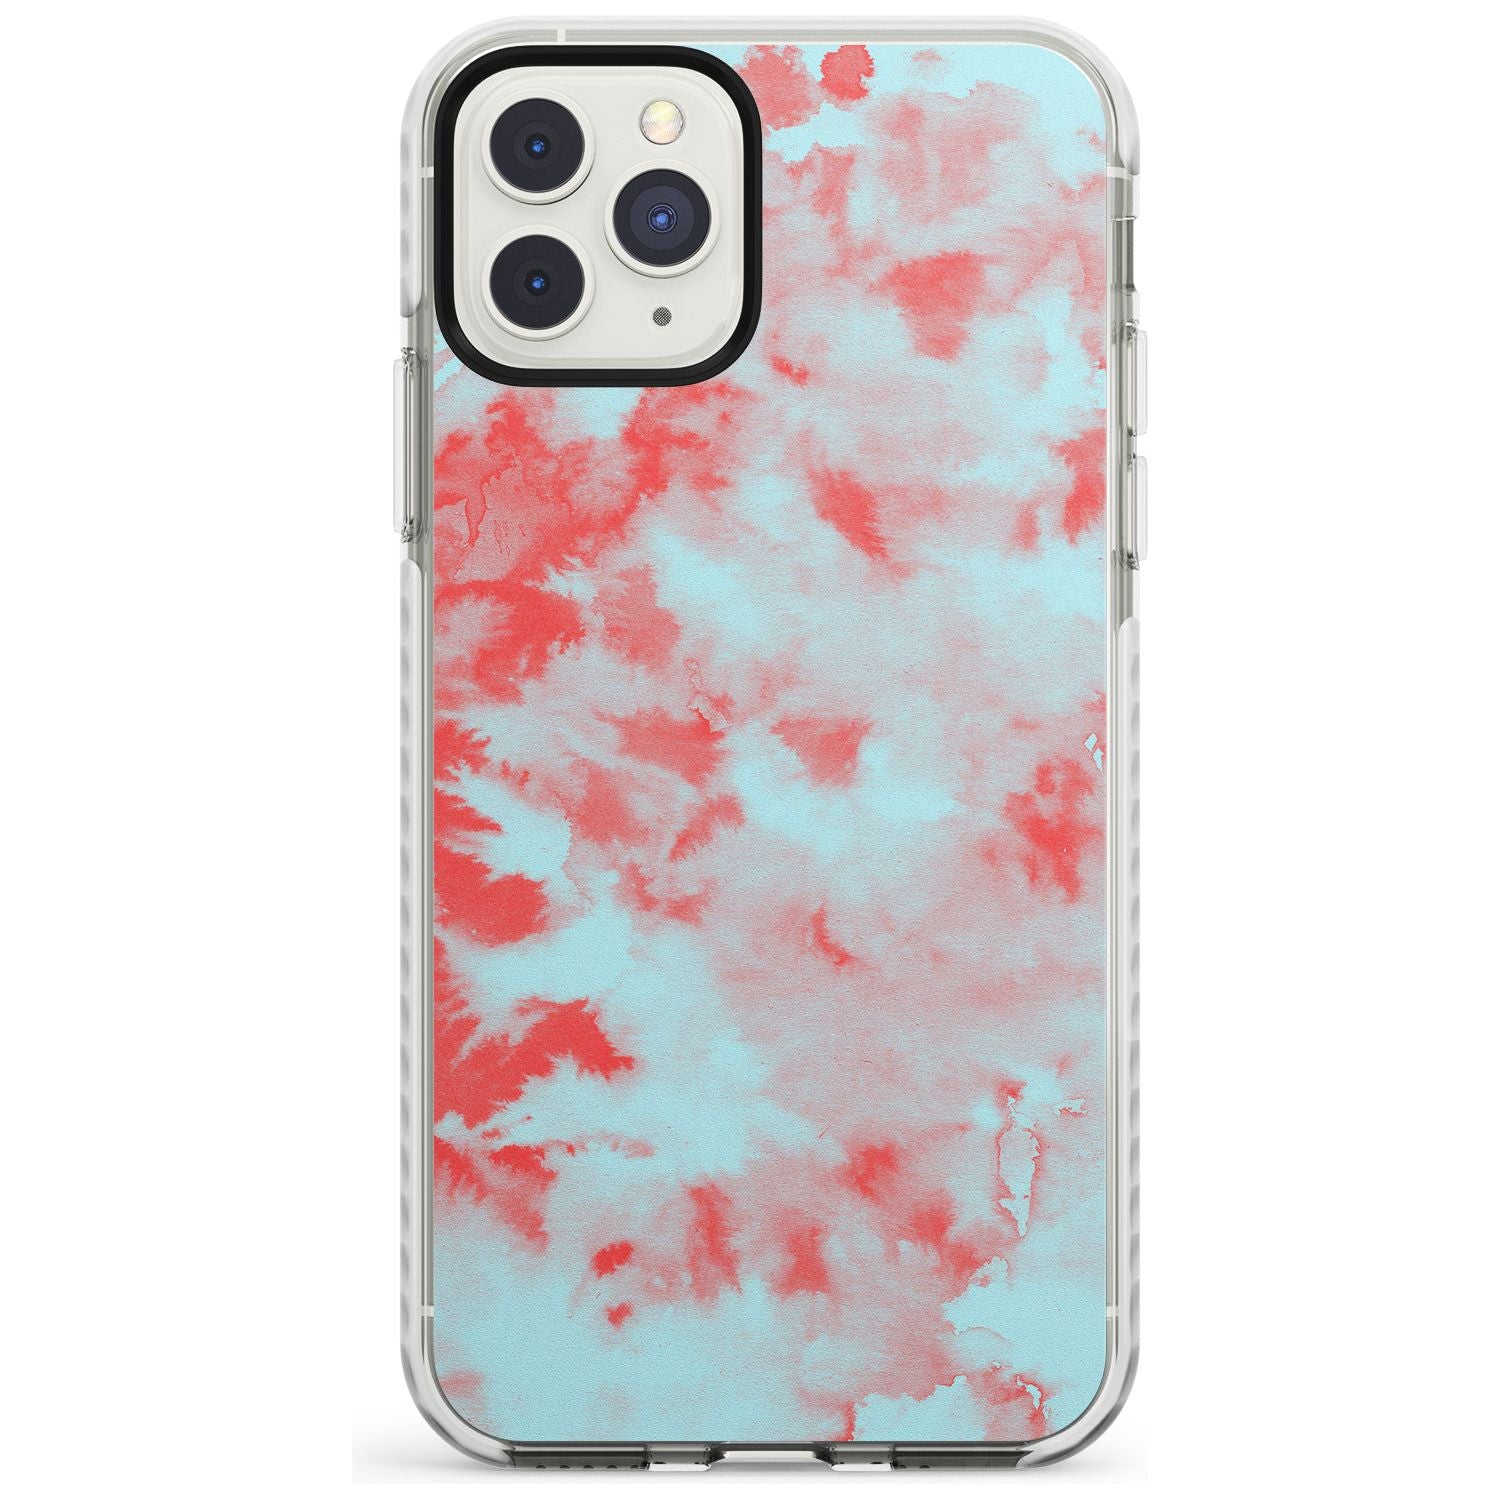 Red & Blue Acid Wash Tie-Dye Pattern Impact Phone Case for iPhone 11 Pro Max